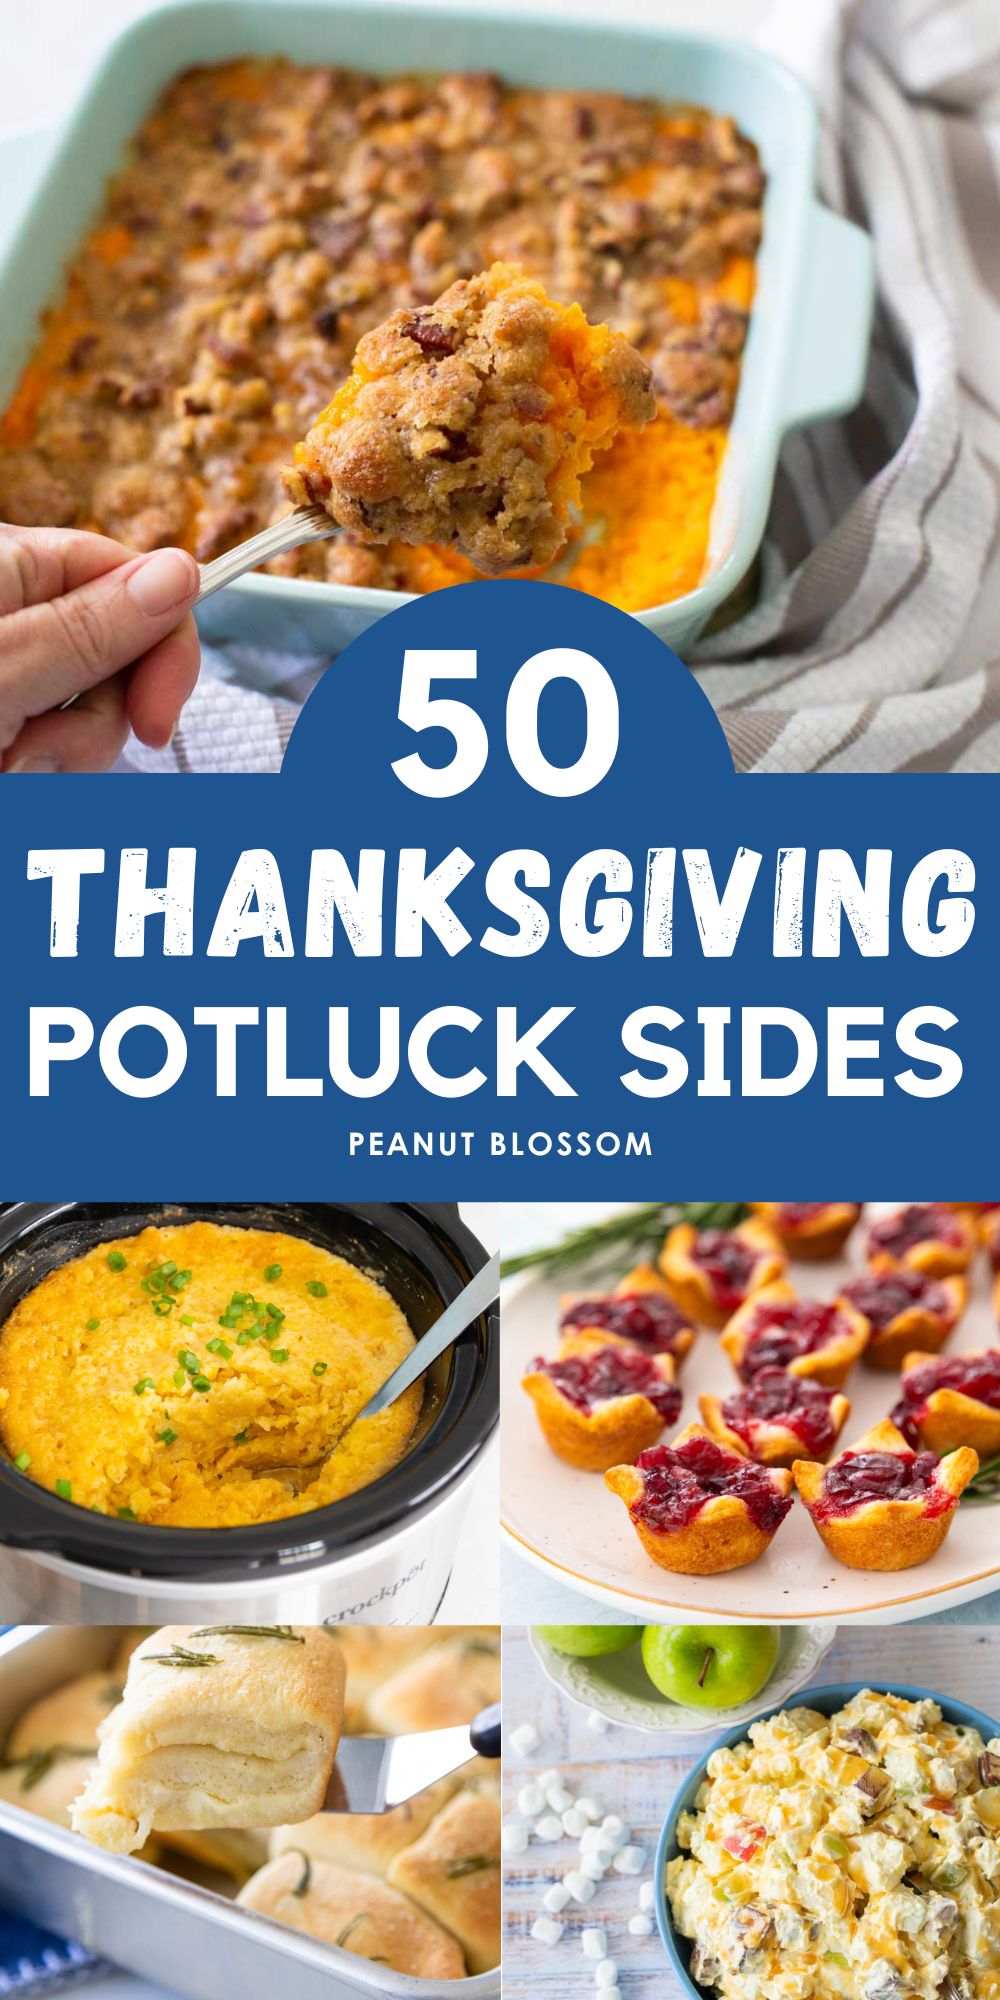 The photo collage shows 5 delicious side dishes to bring to a Thanksgiving potluck party.